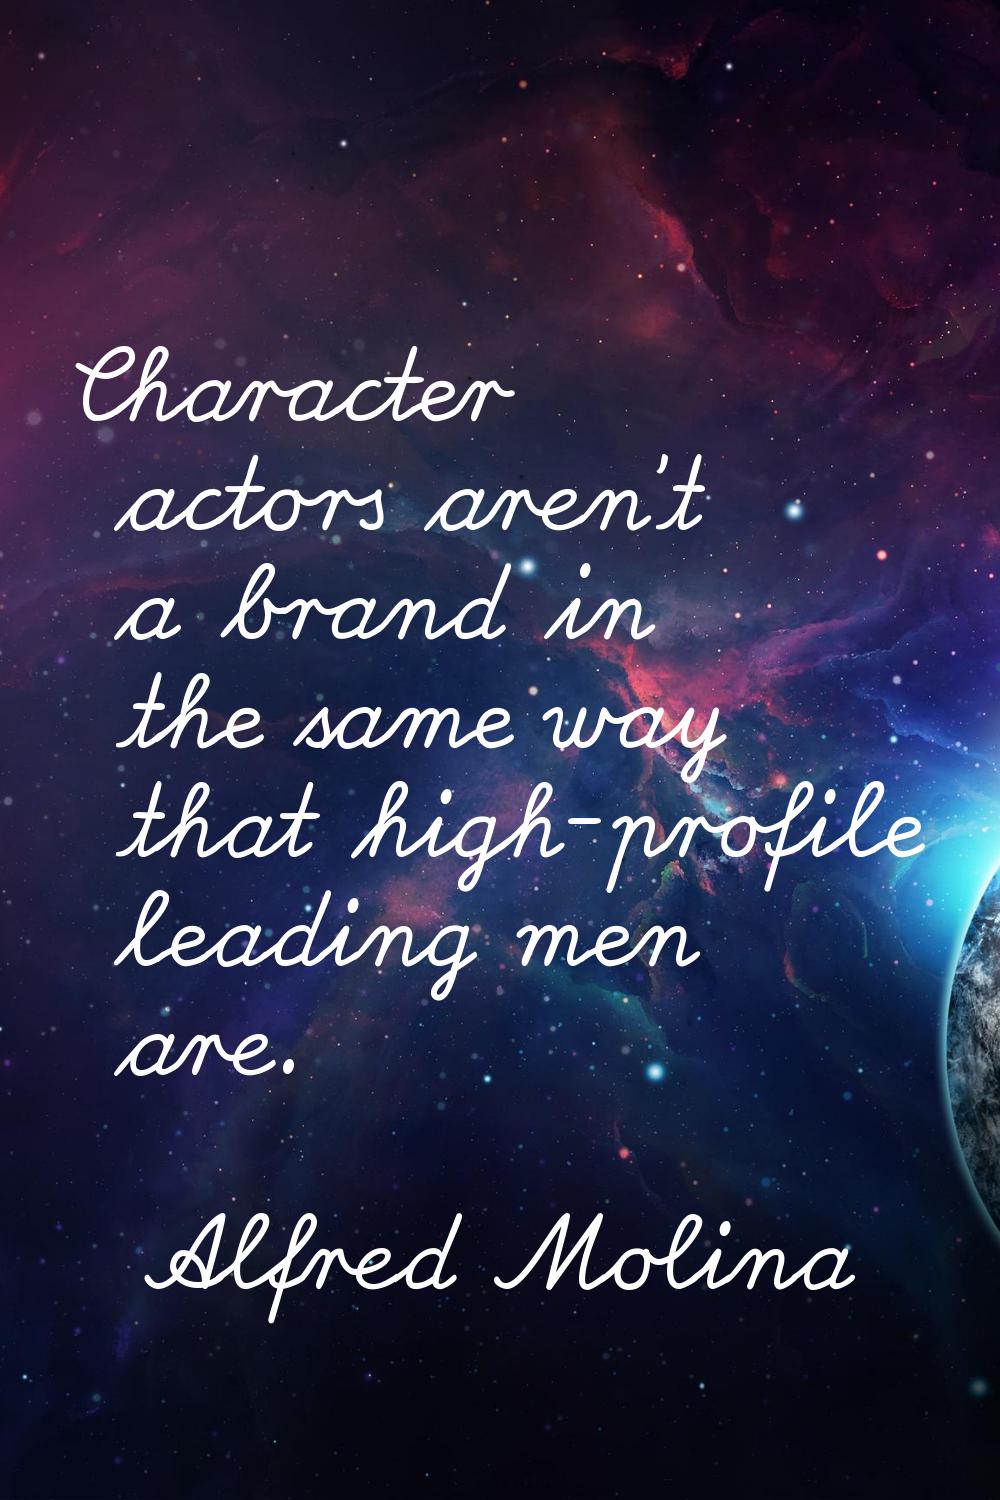 Character actors aren't a brand in the same way that high-profile leading men are.